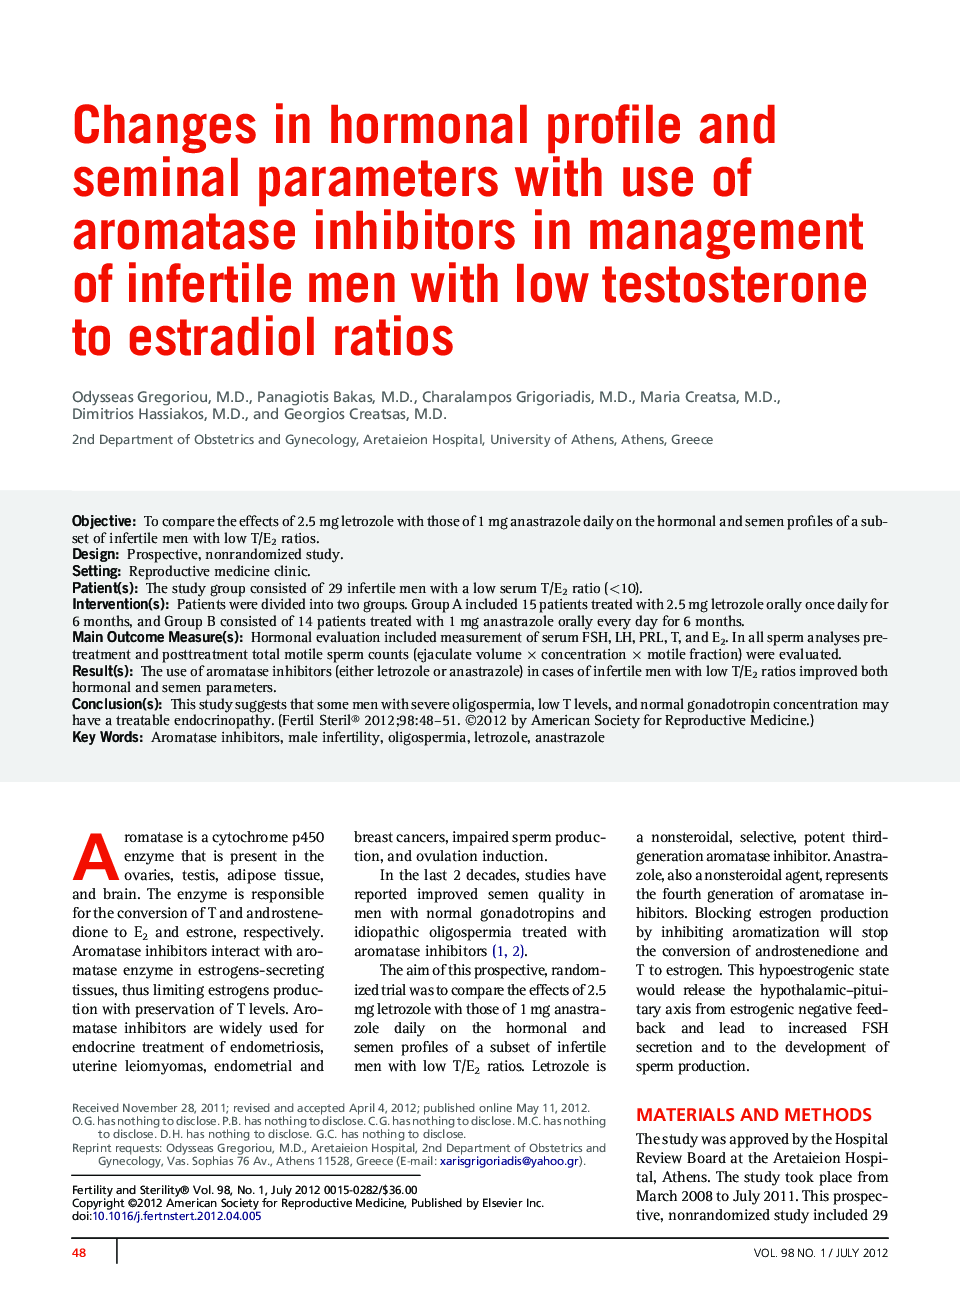 Changes in hormonal profile and seminal parameters with use of aromatase inhibitors in management of infertile men with low testosterone to estradiol ratios 